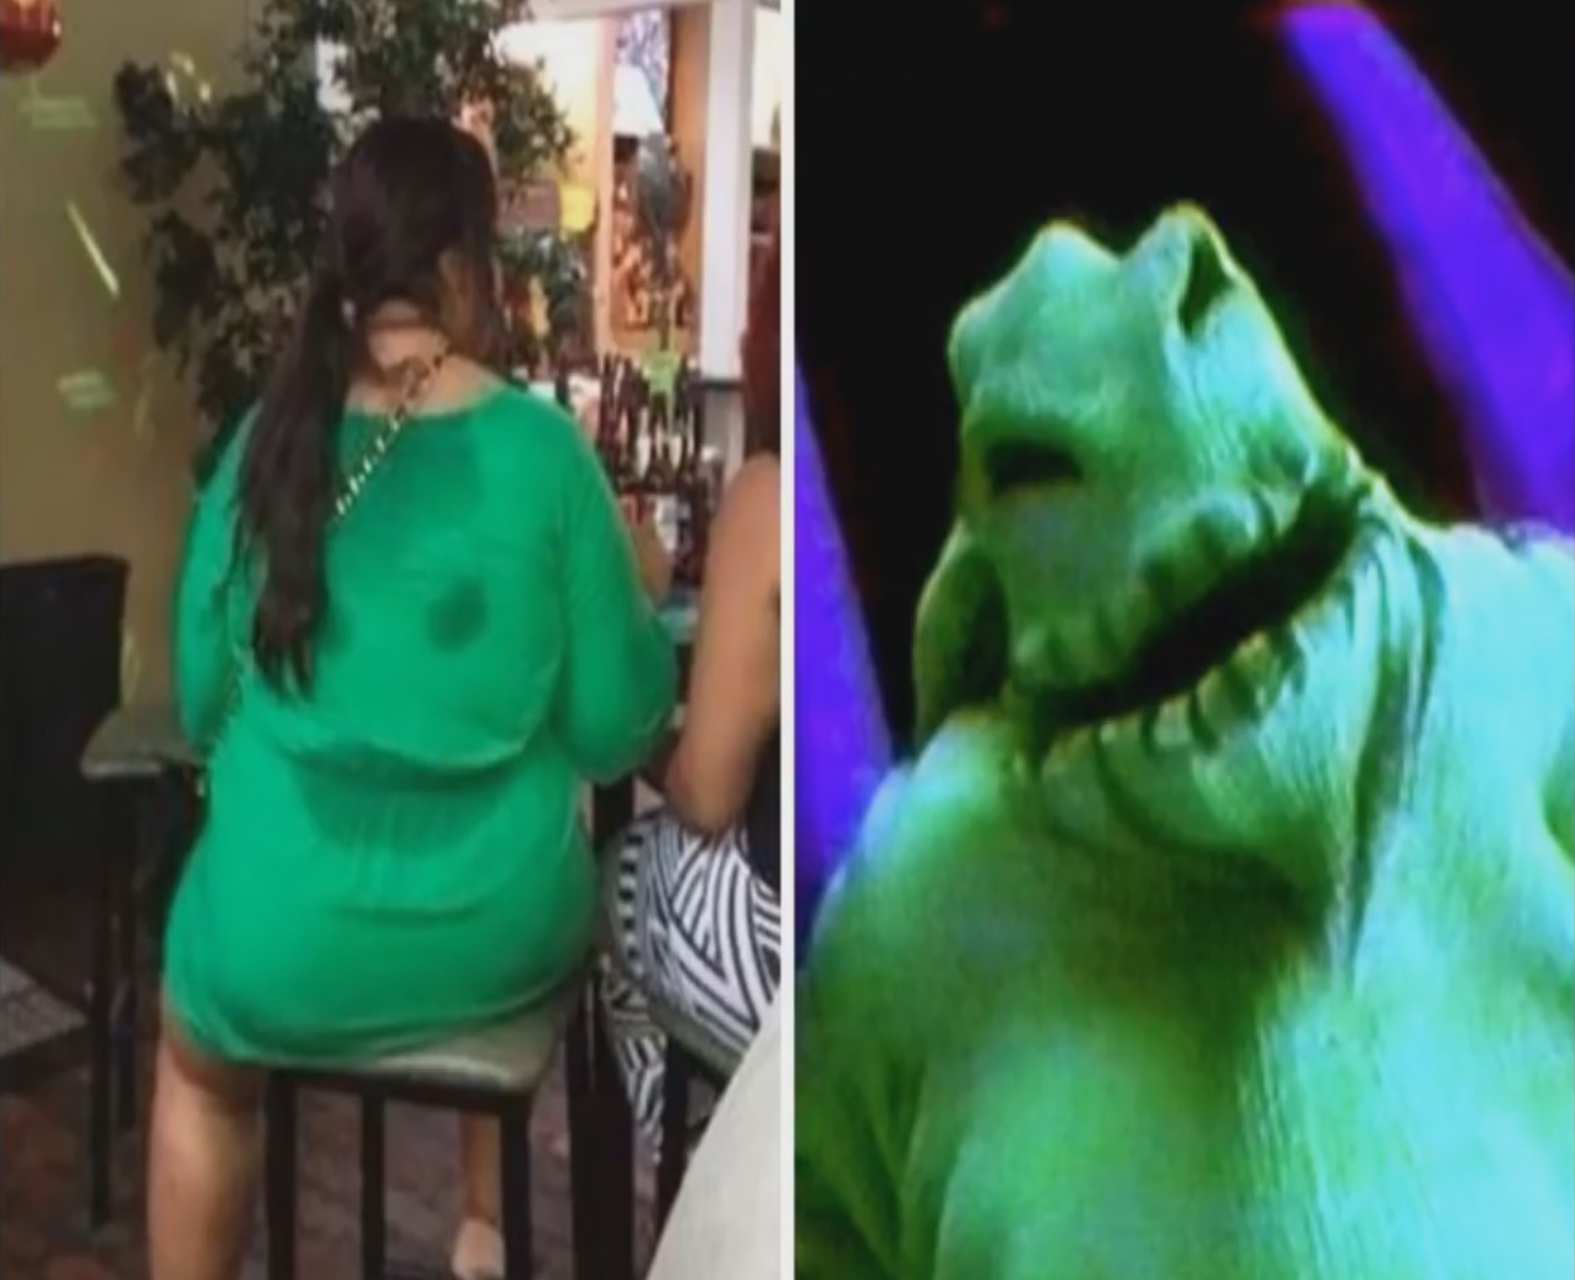 just for laughs - Who Wore It Better part 2